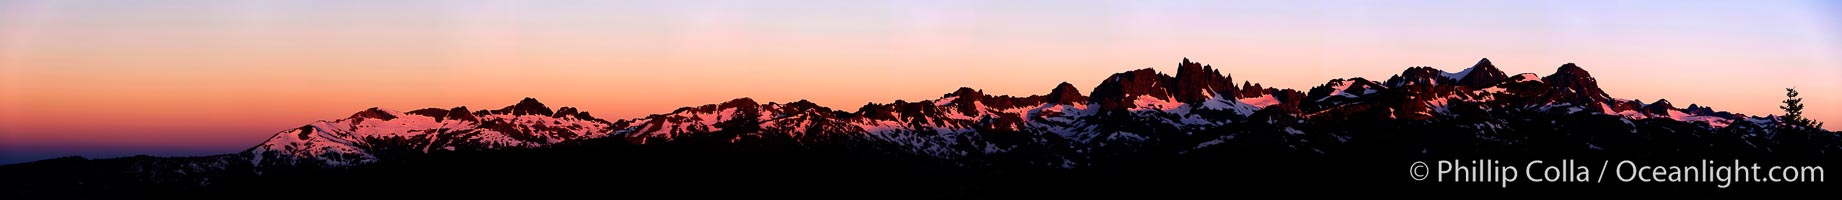 Panorama of the Minarets at sunrise, near Mammoth Mountain.  The Minarets are a series of seventeen jagged peaks in the Ritter Range, west of Mammoth Mountain in the Ansel Adams Wilderness.  These basalt peaks were carved by glaciers on both sides of the range.  The highest of the Minarets stands 12,281 feet above sea level, Mammoth Lakes, California